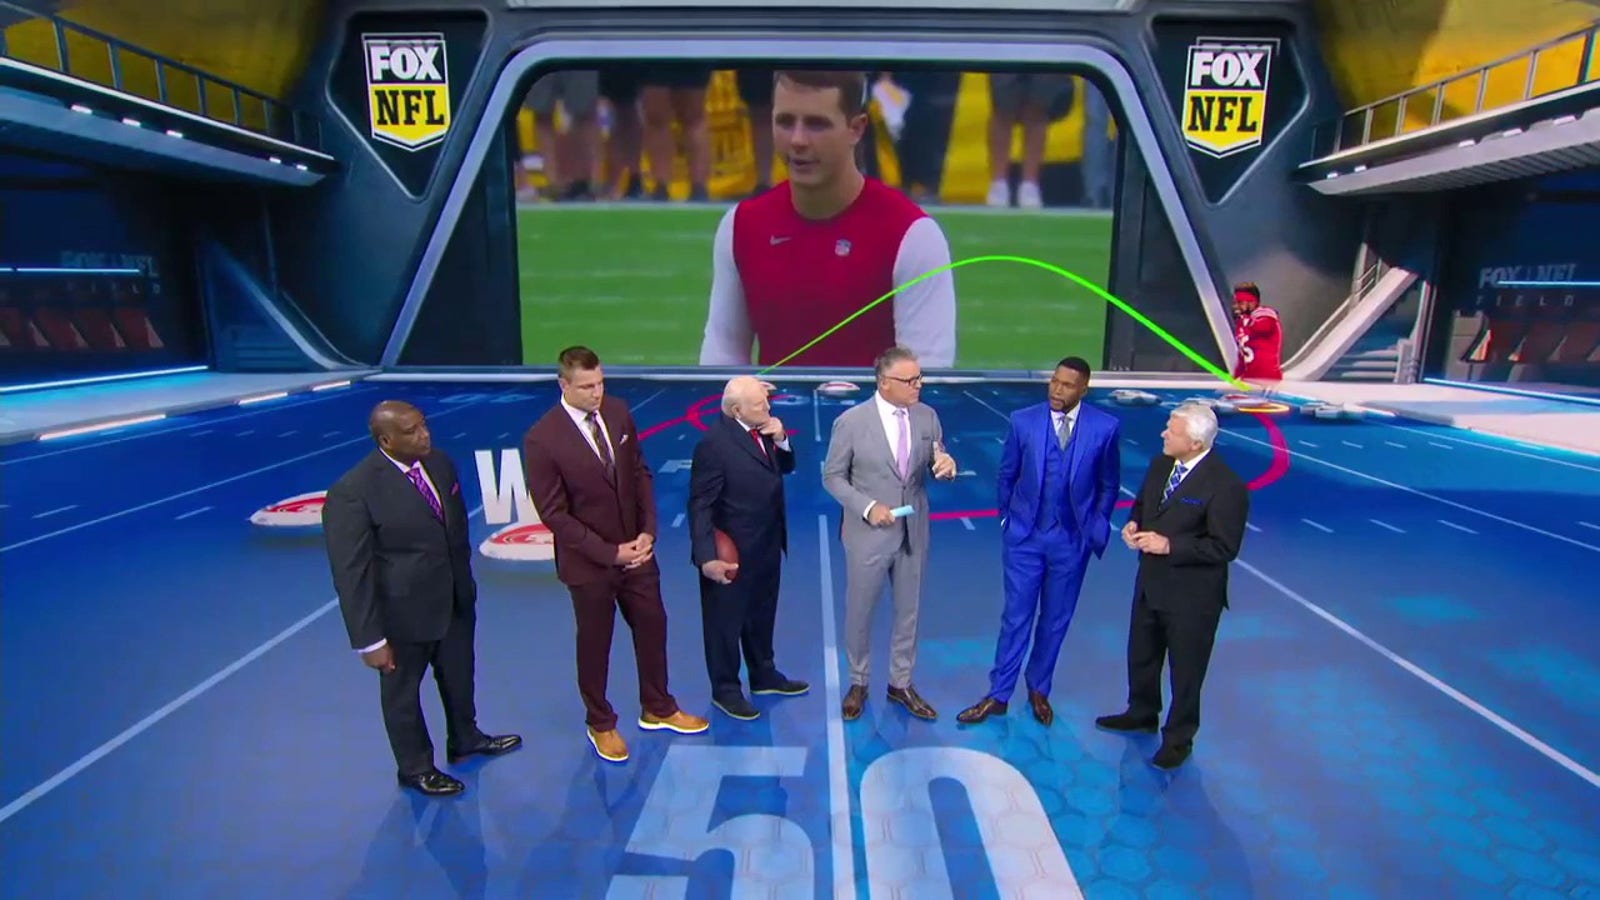 The 'FOX NFL Sunday' crew discusses the expectations on 49ers QB Brock Purdy